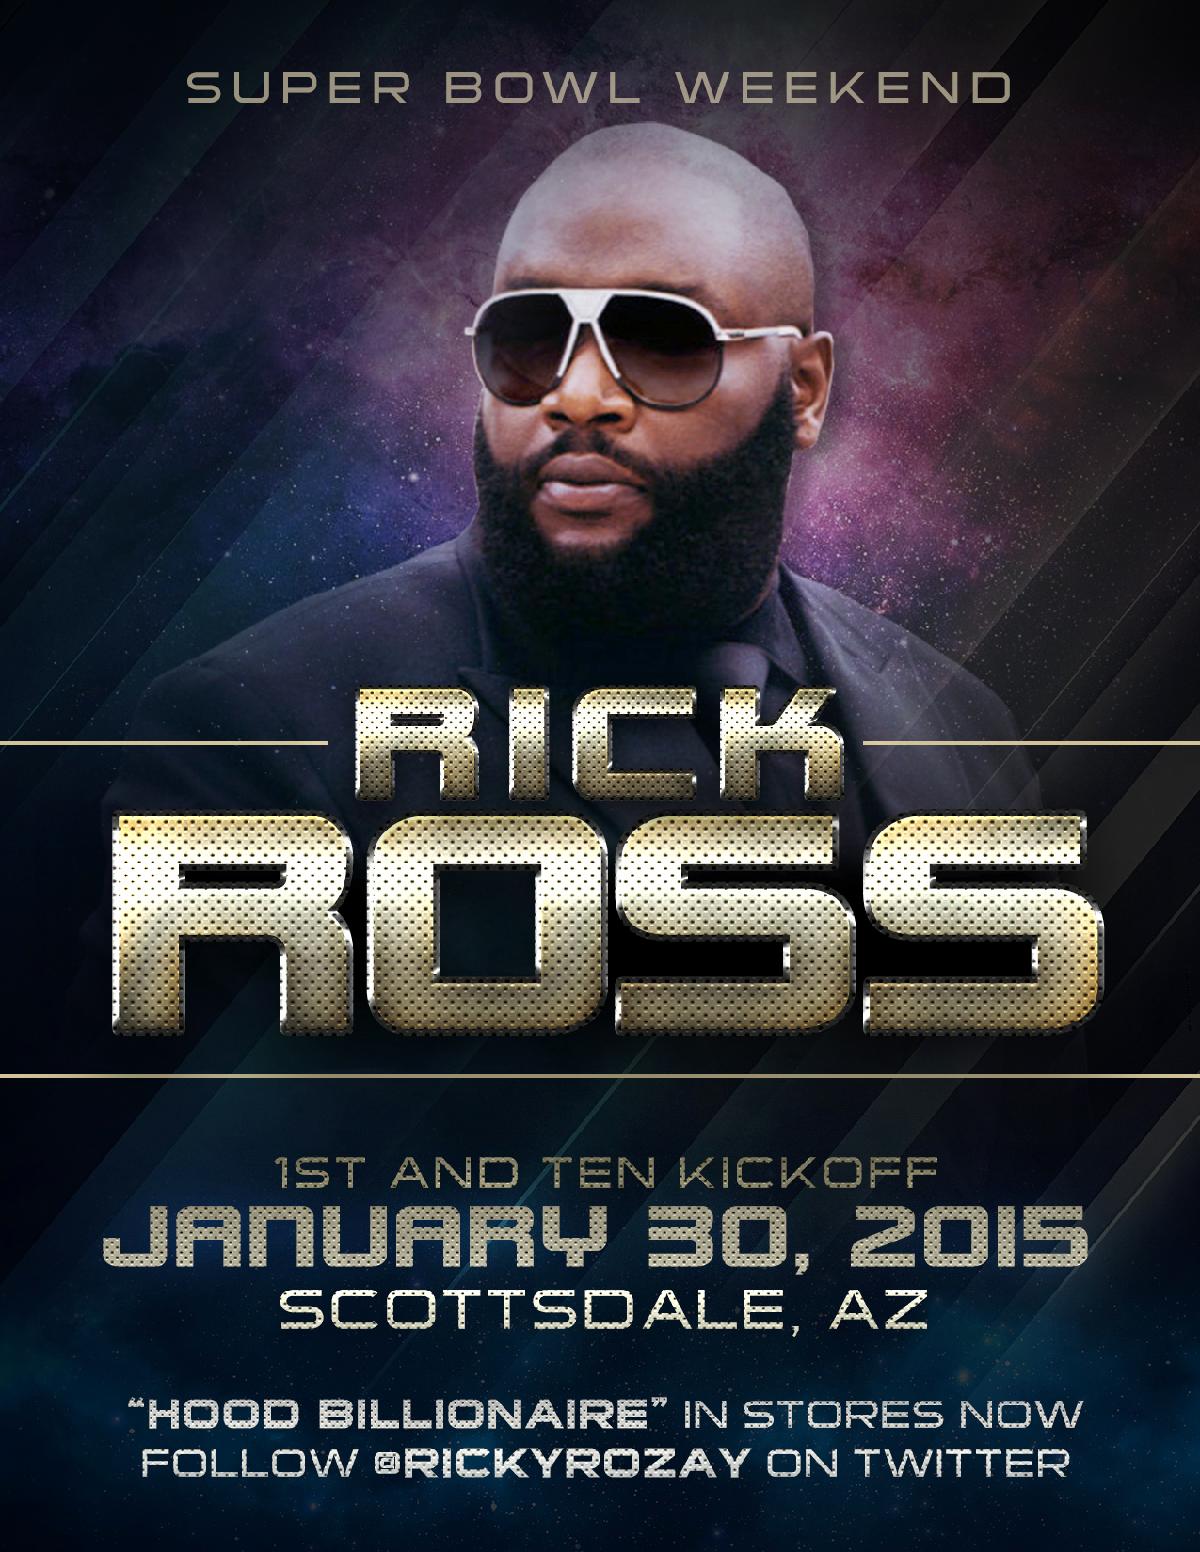 LOS ANGELES SUPER BOWL PARTIES AND TAILGATES 2022 Rick Ross Returns